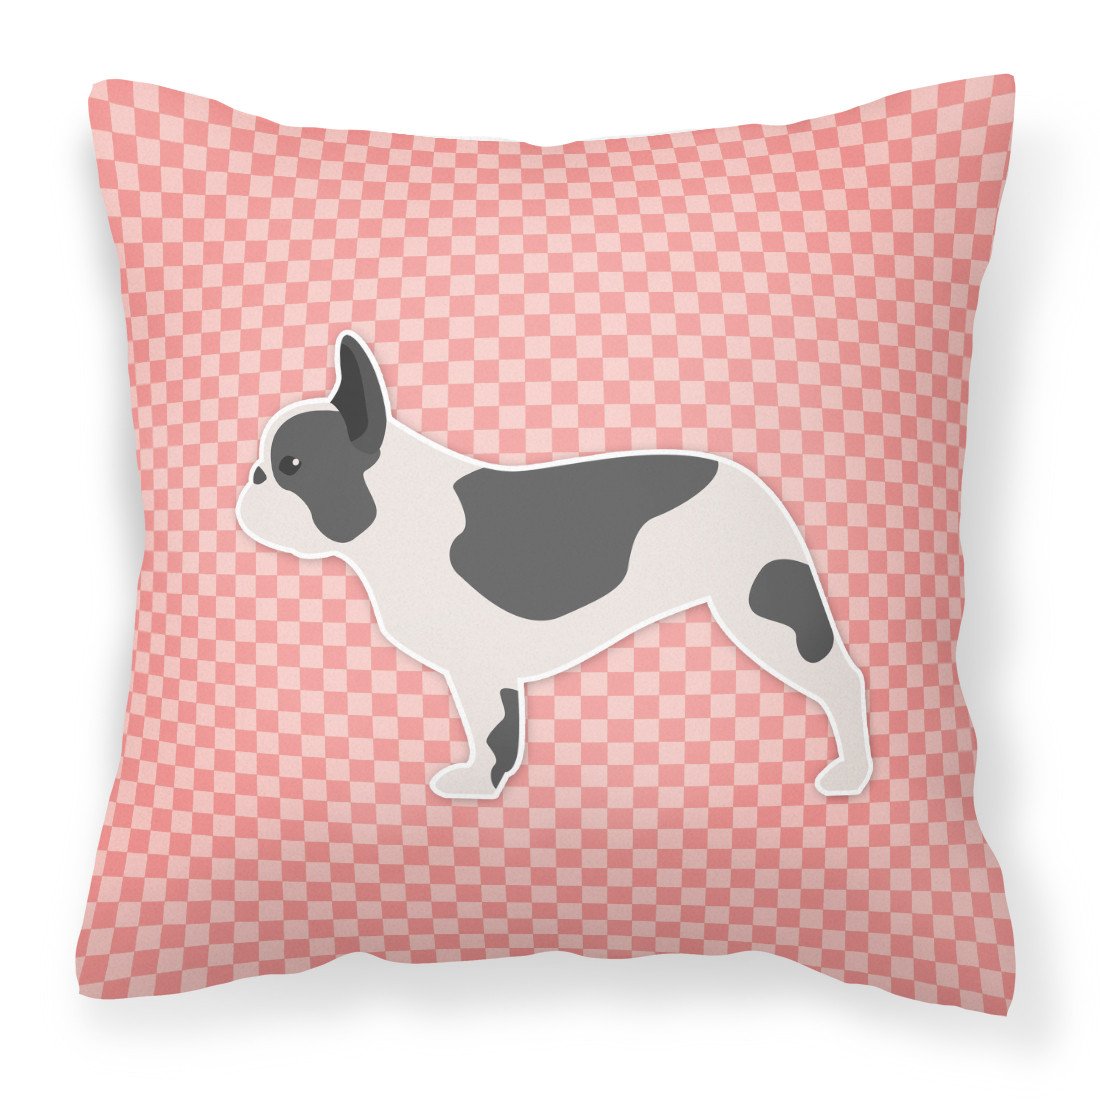 French Bulldog Checkerboard Pink Fabric Decorative Pillow BB3641PW1818 by Caroline's Treasures